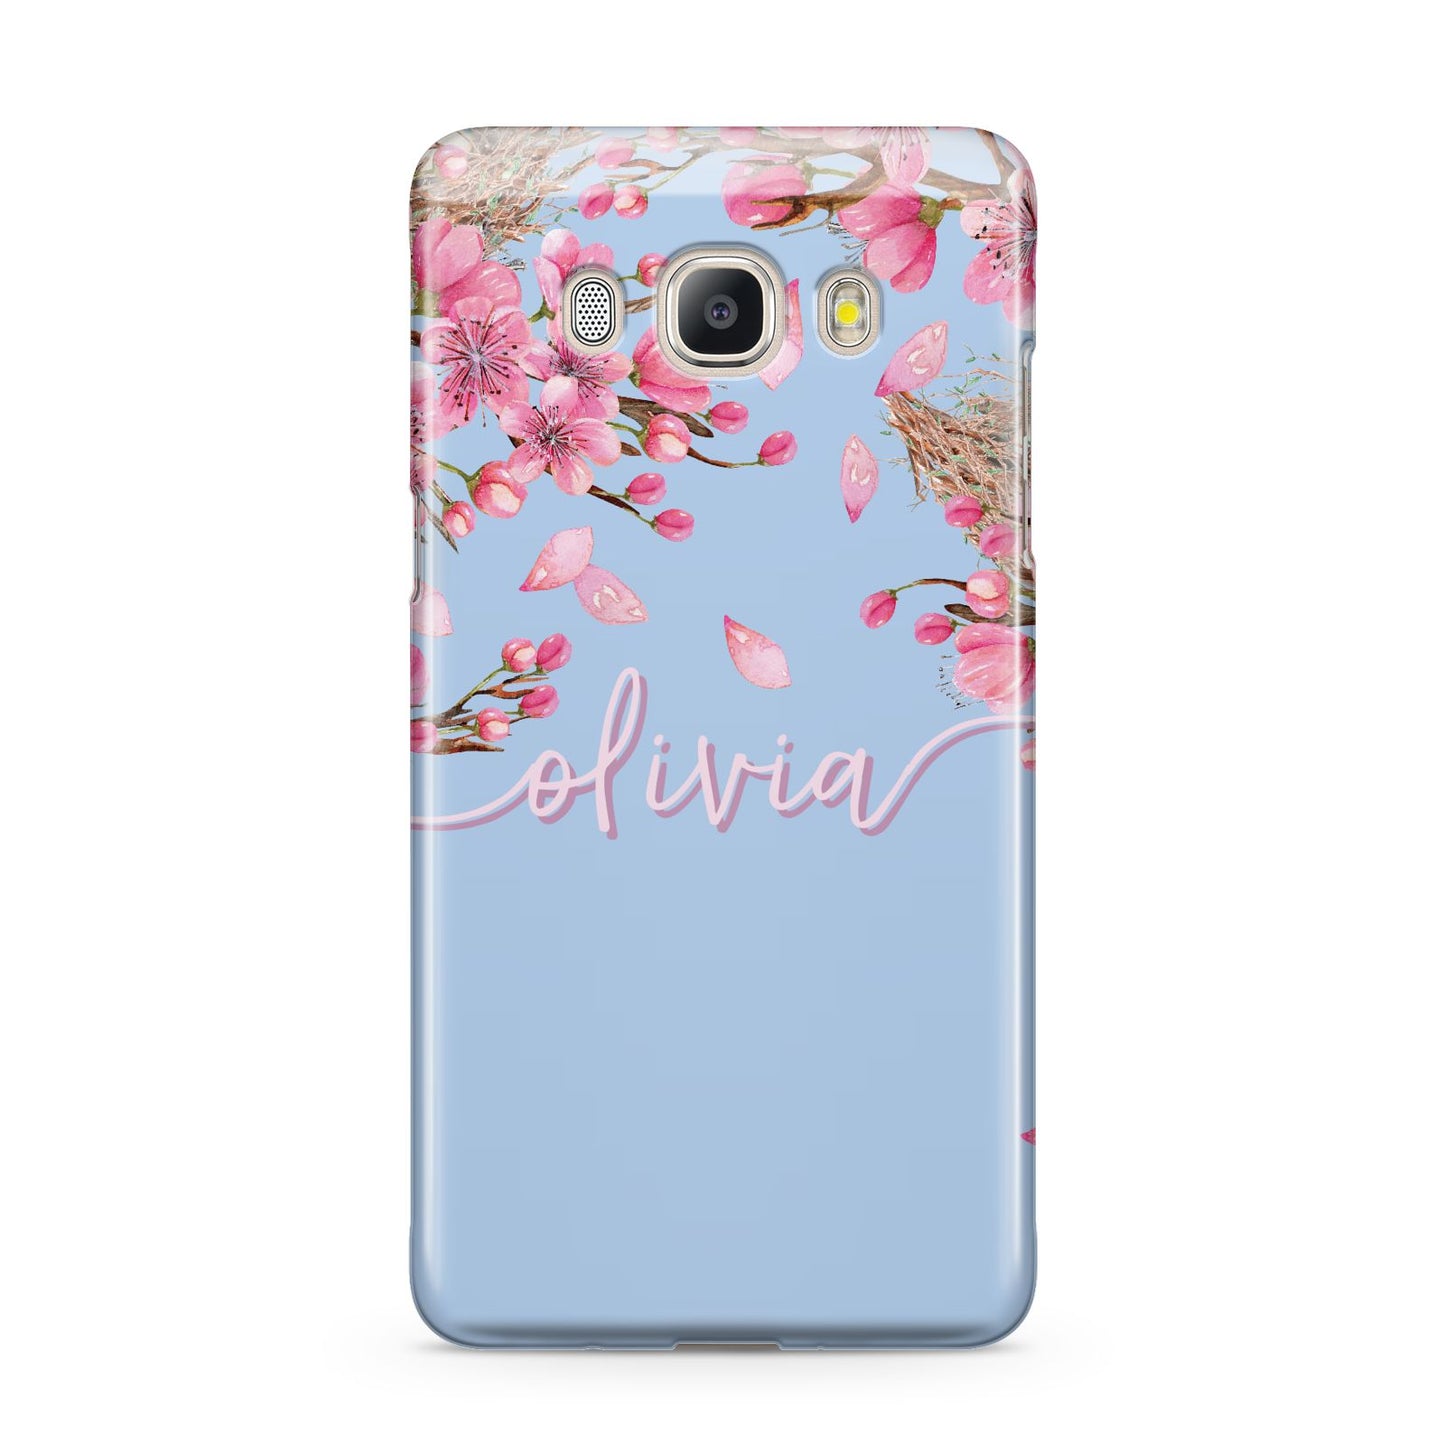 Personalised Blue Pink Blossom Samsung Galaxy J5 2016 Case